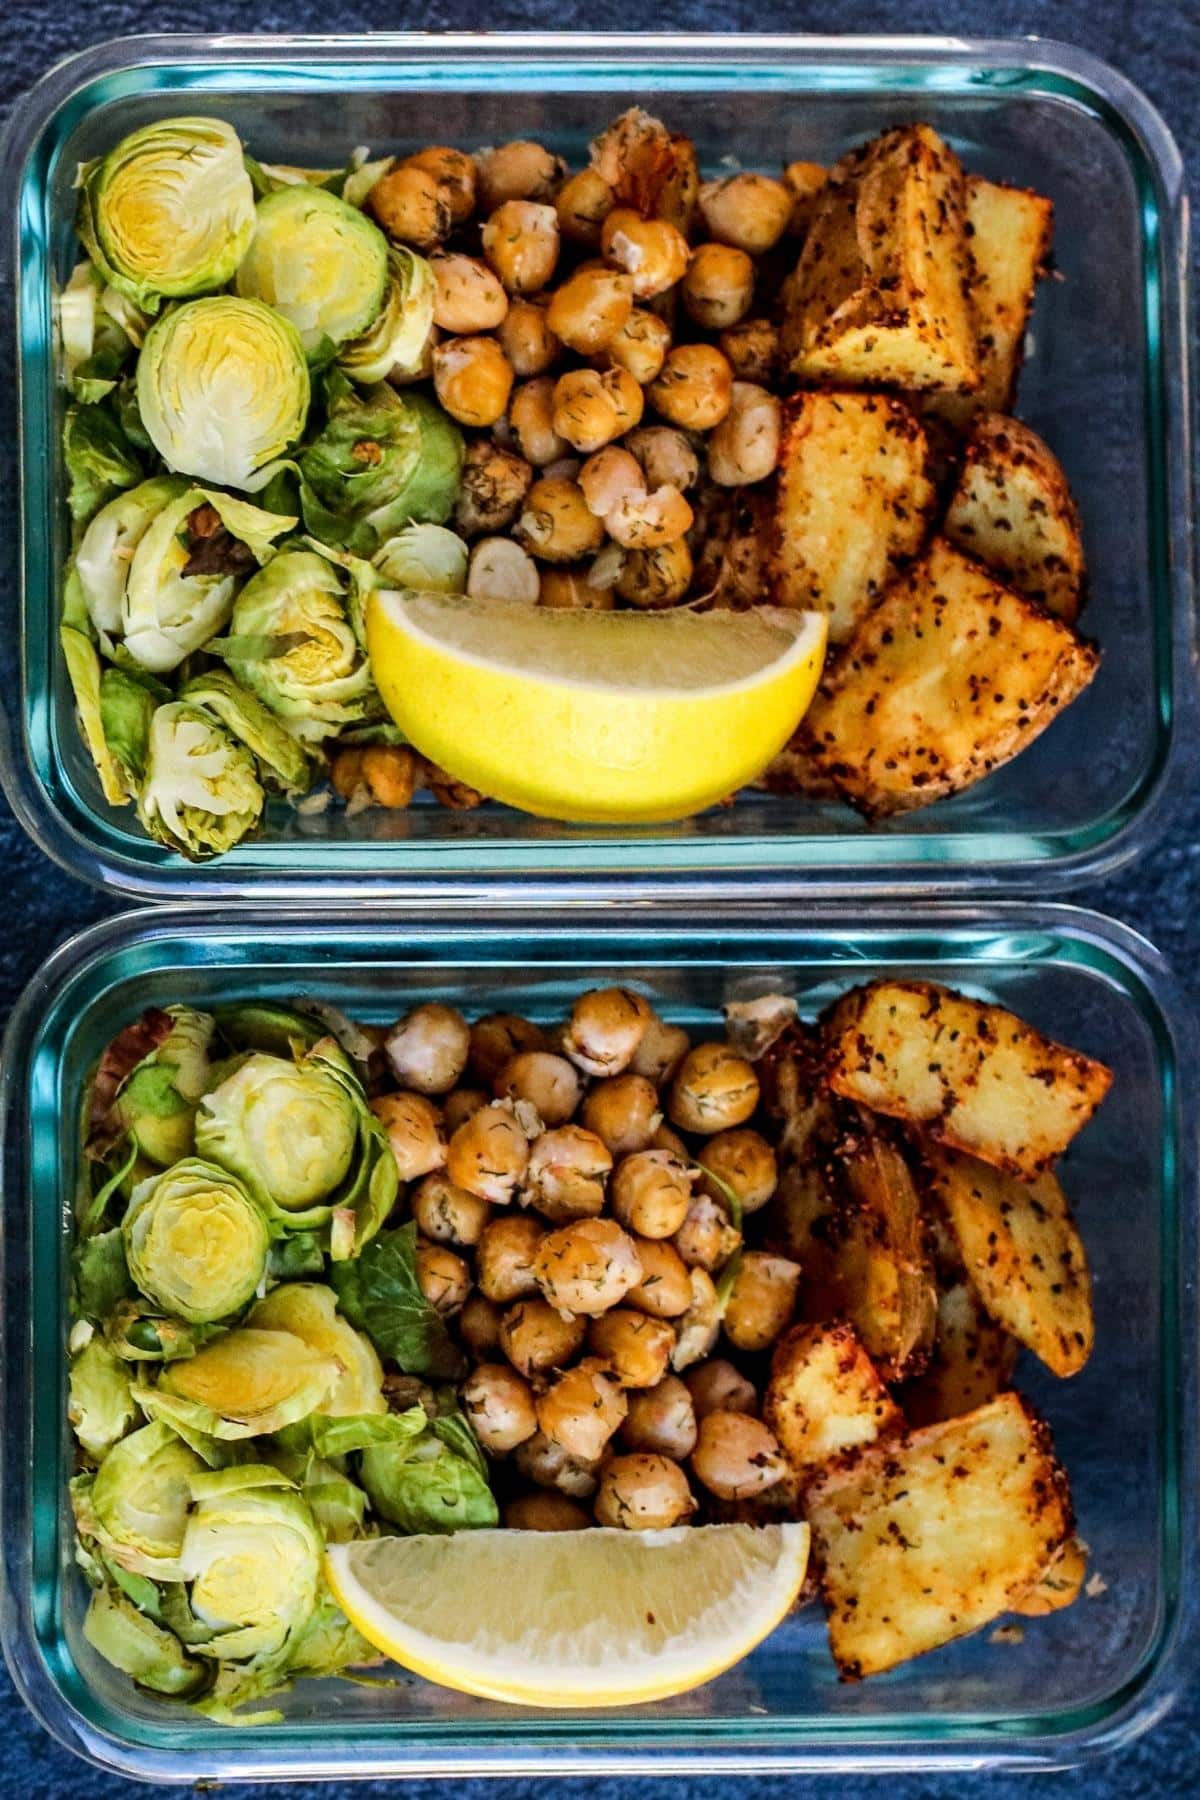 Roasted Brussels sprouts, chickpeas, lemon wedges, and potatoes in glass storage containers.